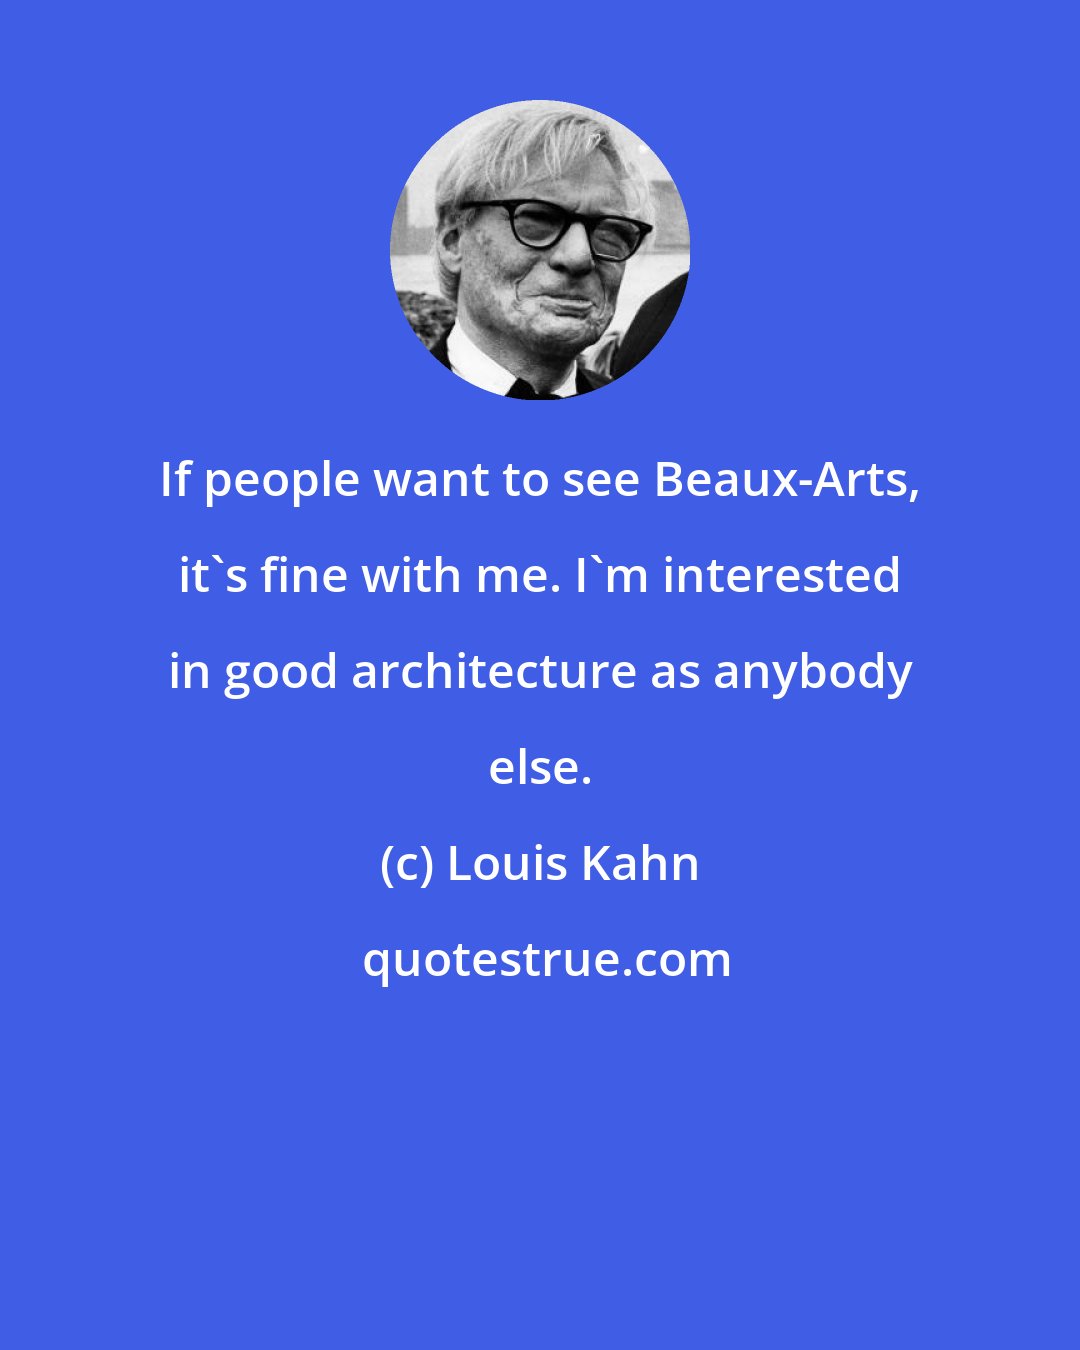 Louis Kahn: If people want to see Beaux-Arts, it's fine with me. I'm interested in good architecture as anybody else.